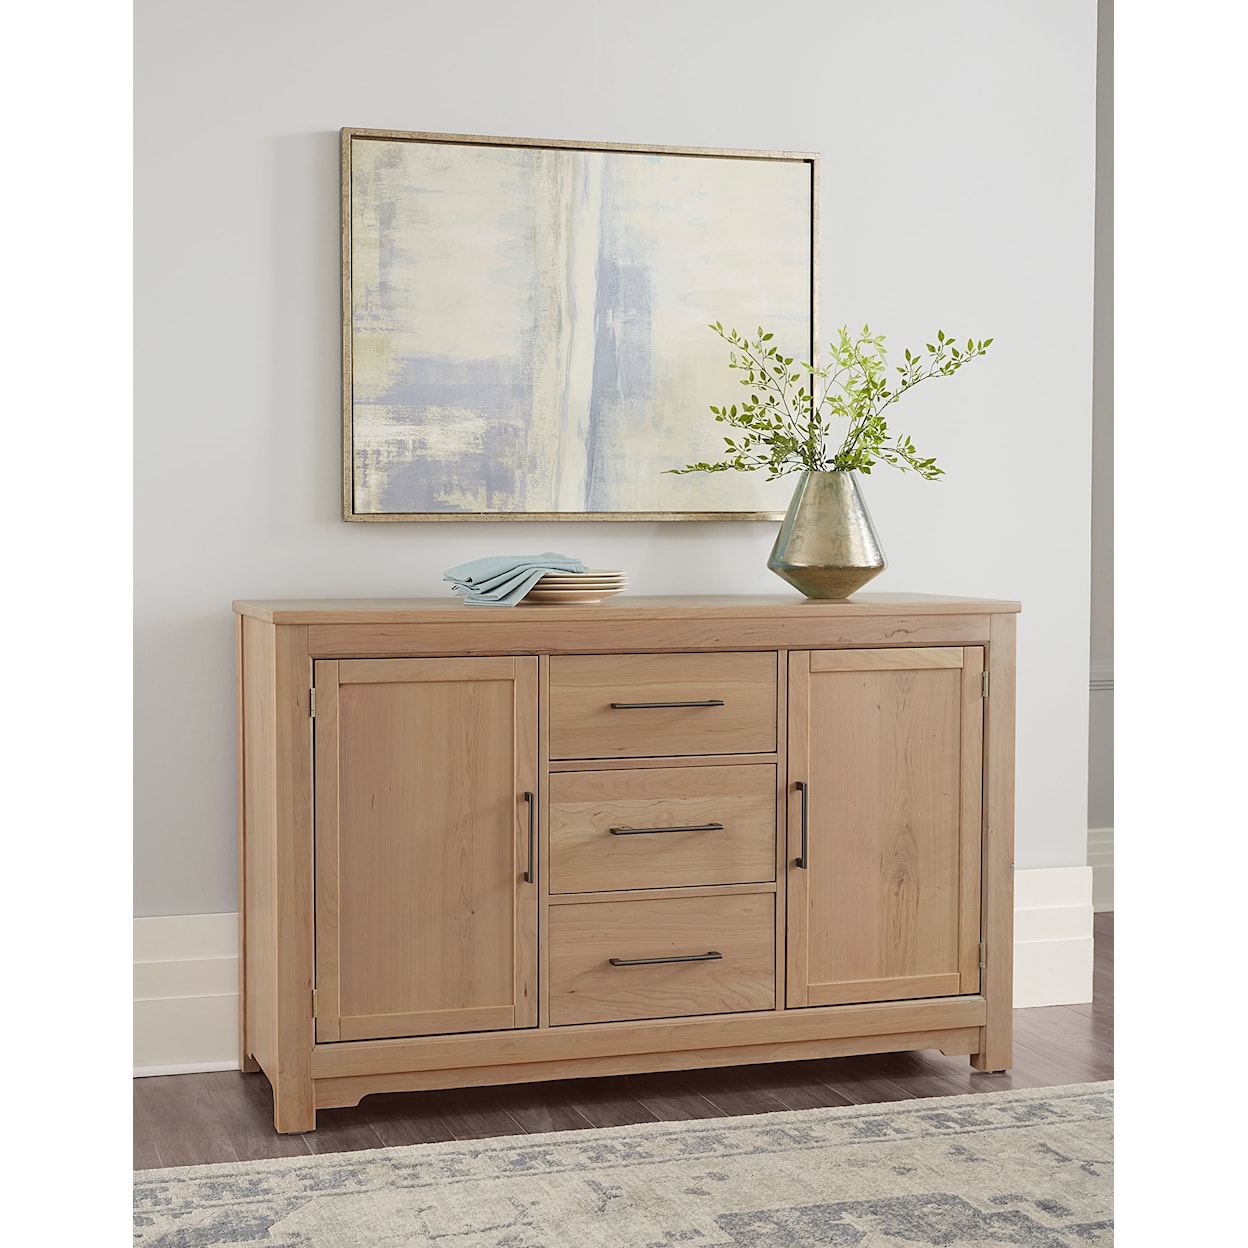 Artisan & Post Crafted Cherry Dining Room Server